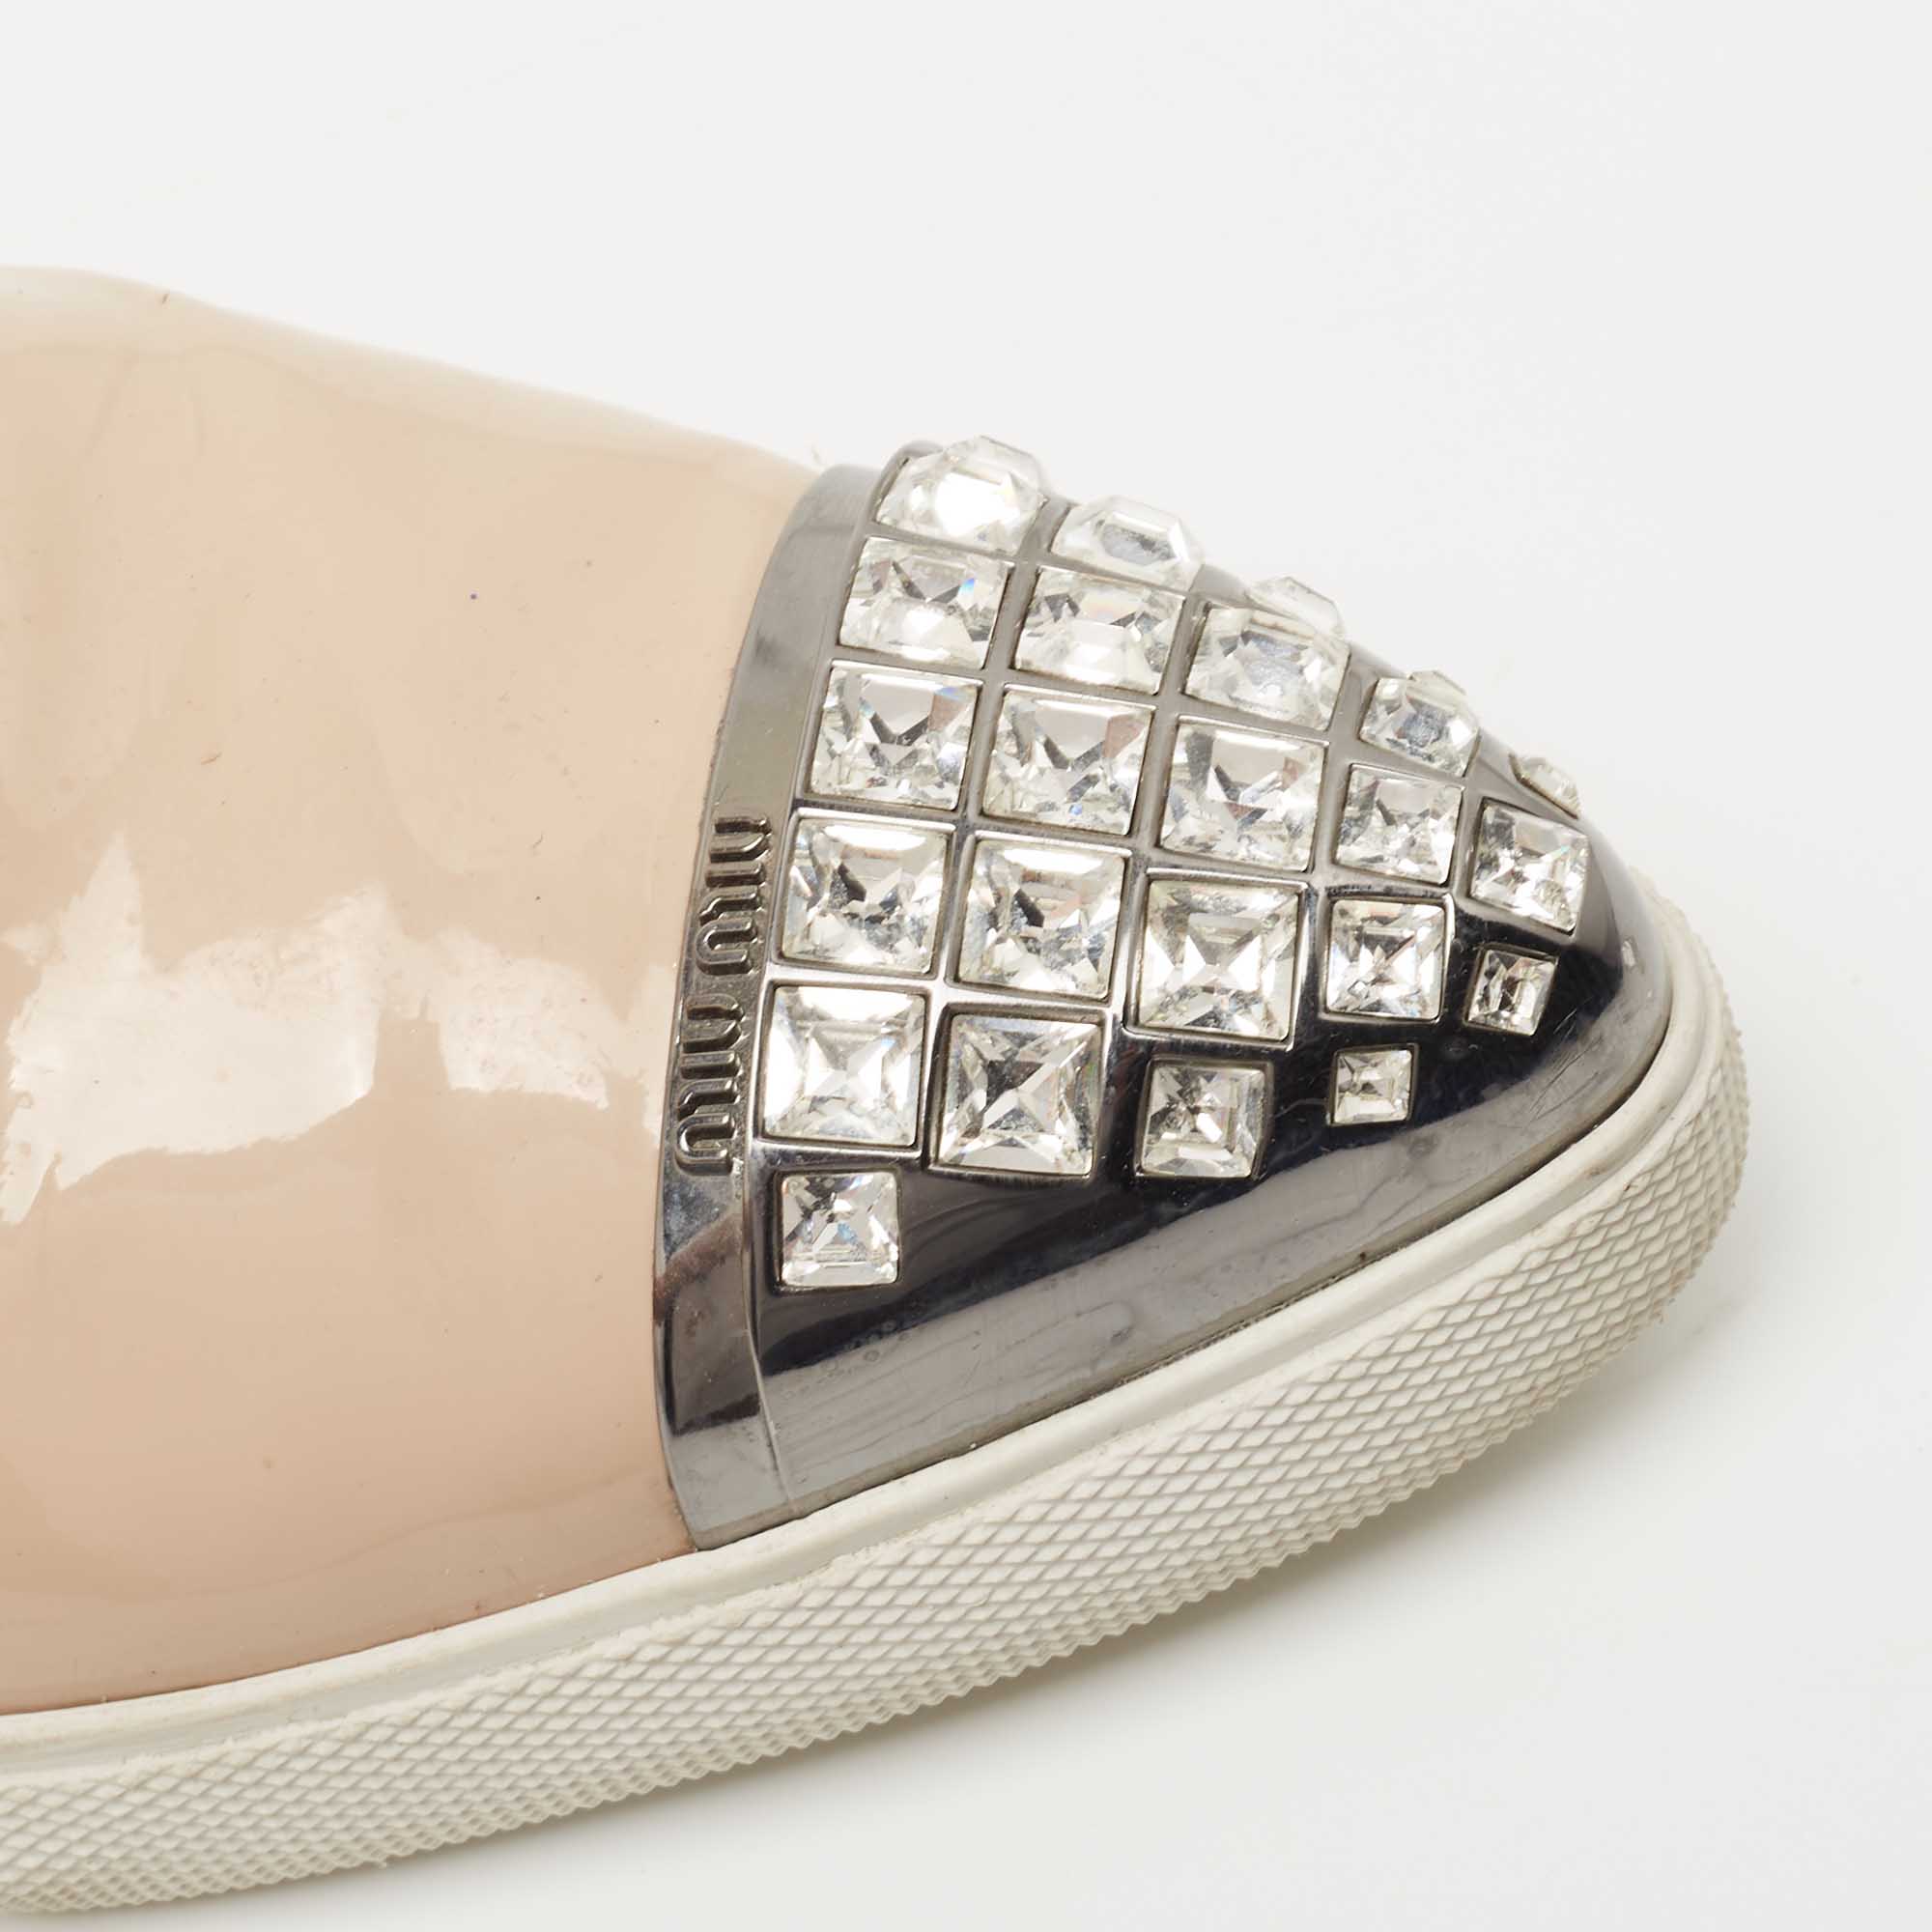 Miu Miu Beige Patent Leather Crystal Embellished Sneakers Size 38